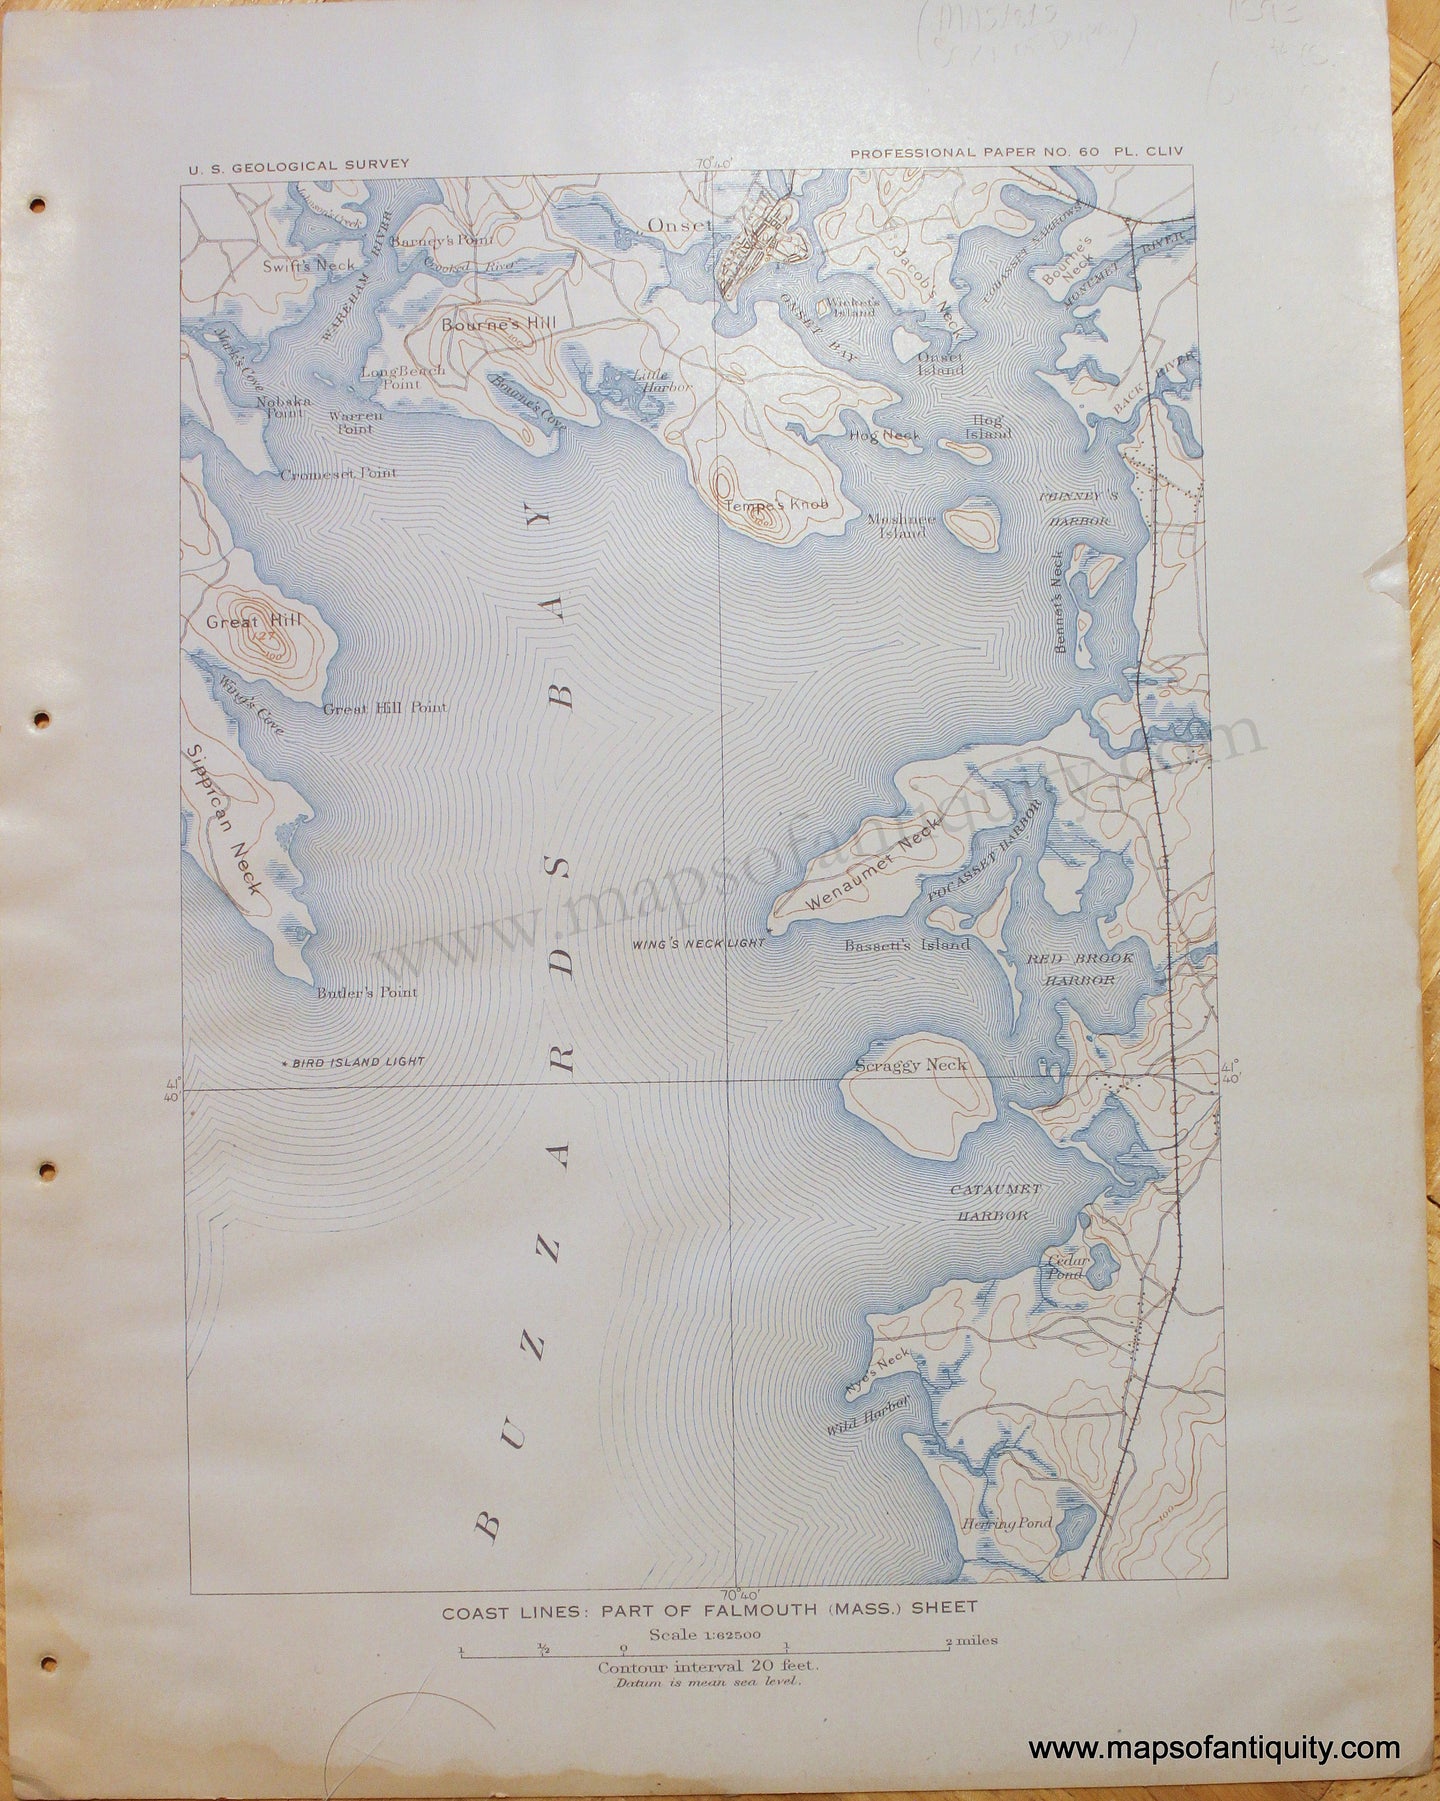 Antique-Printed-Color-Map-Coast-Lines-Part-of-Falmouth-(Mass.)-Sheet-Nautical-Charts-Geological-Maps-Falmouth--c.-1919-USGS-Maps-Of-Antiquity